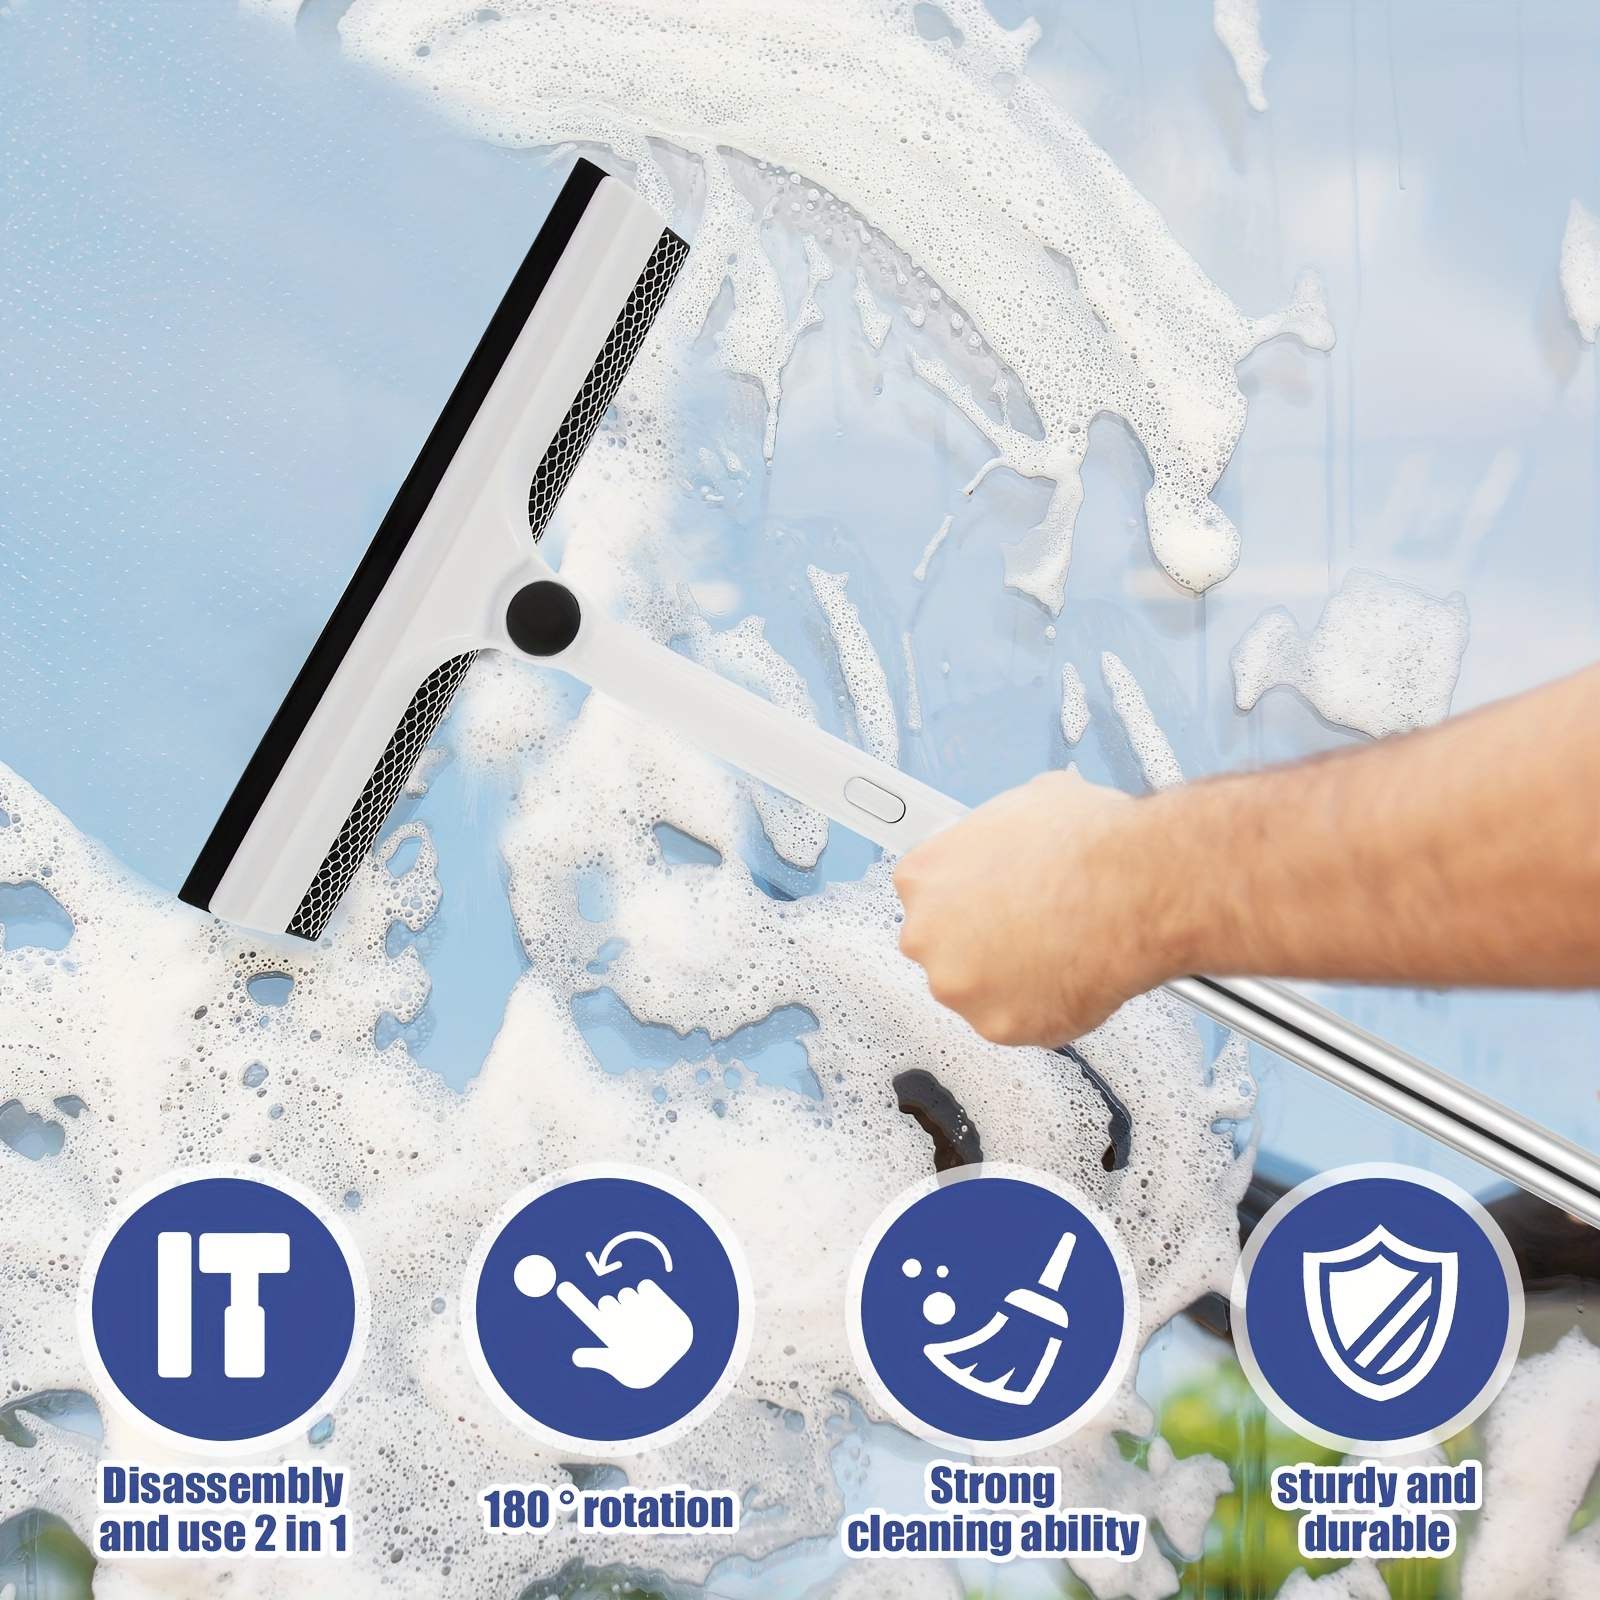 Window Squeegee For Window Cleaning, Shower Squeegee For Shower Door,  Shower, Mirror, Tile Wall, Rotating Window Squeegee